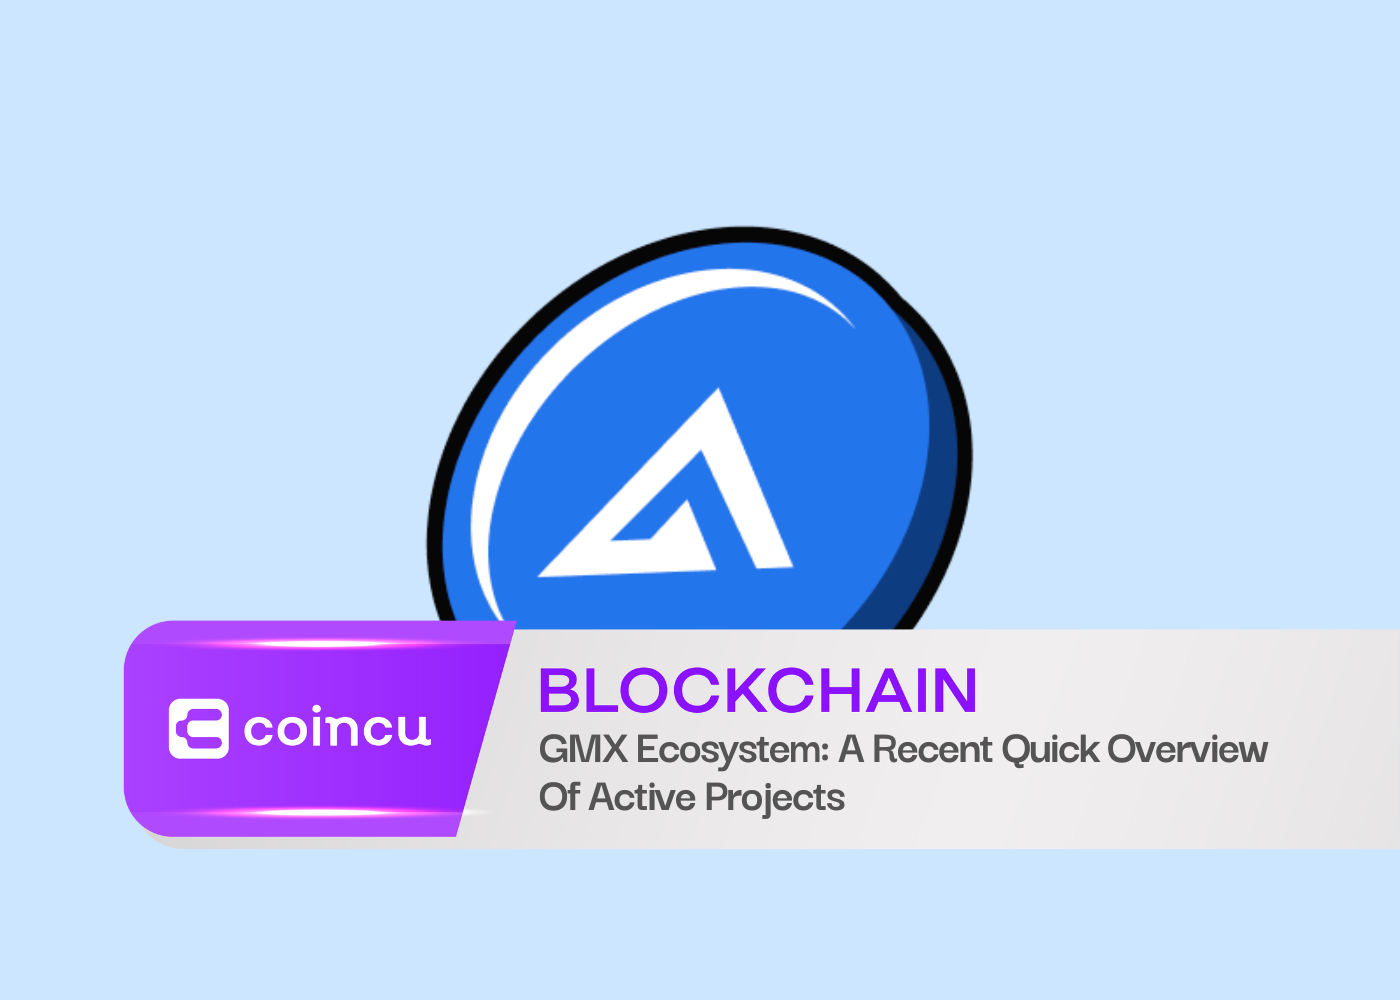 GMX Ecosystem: A Recent Quick Overview Of Active Projects